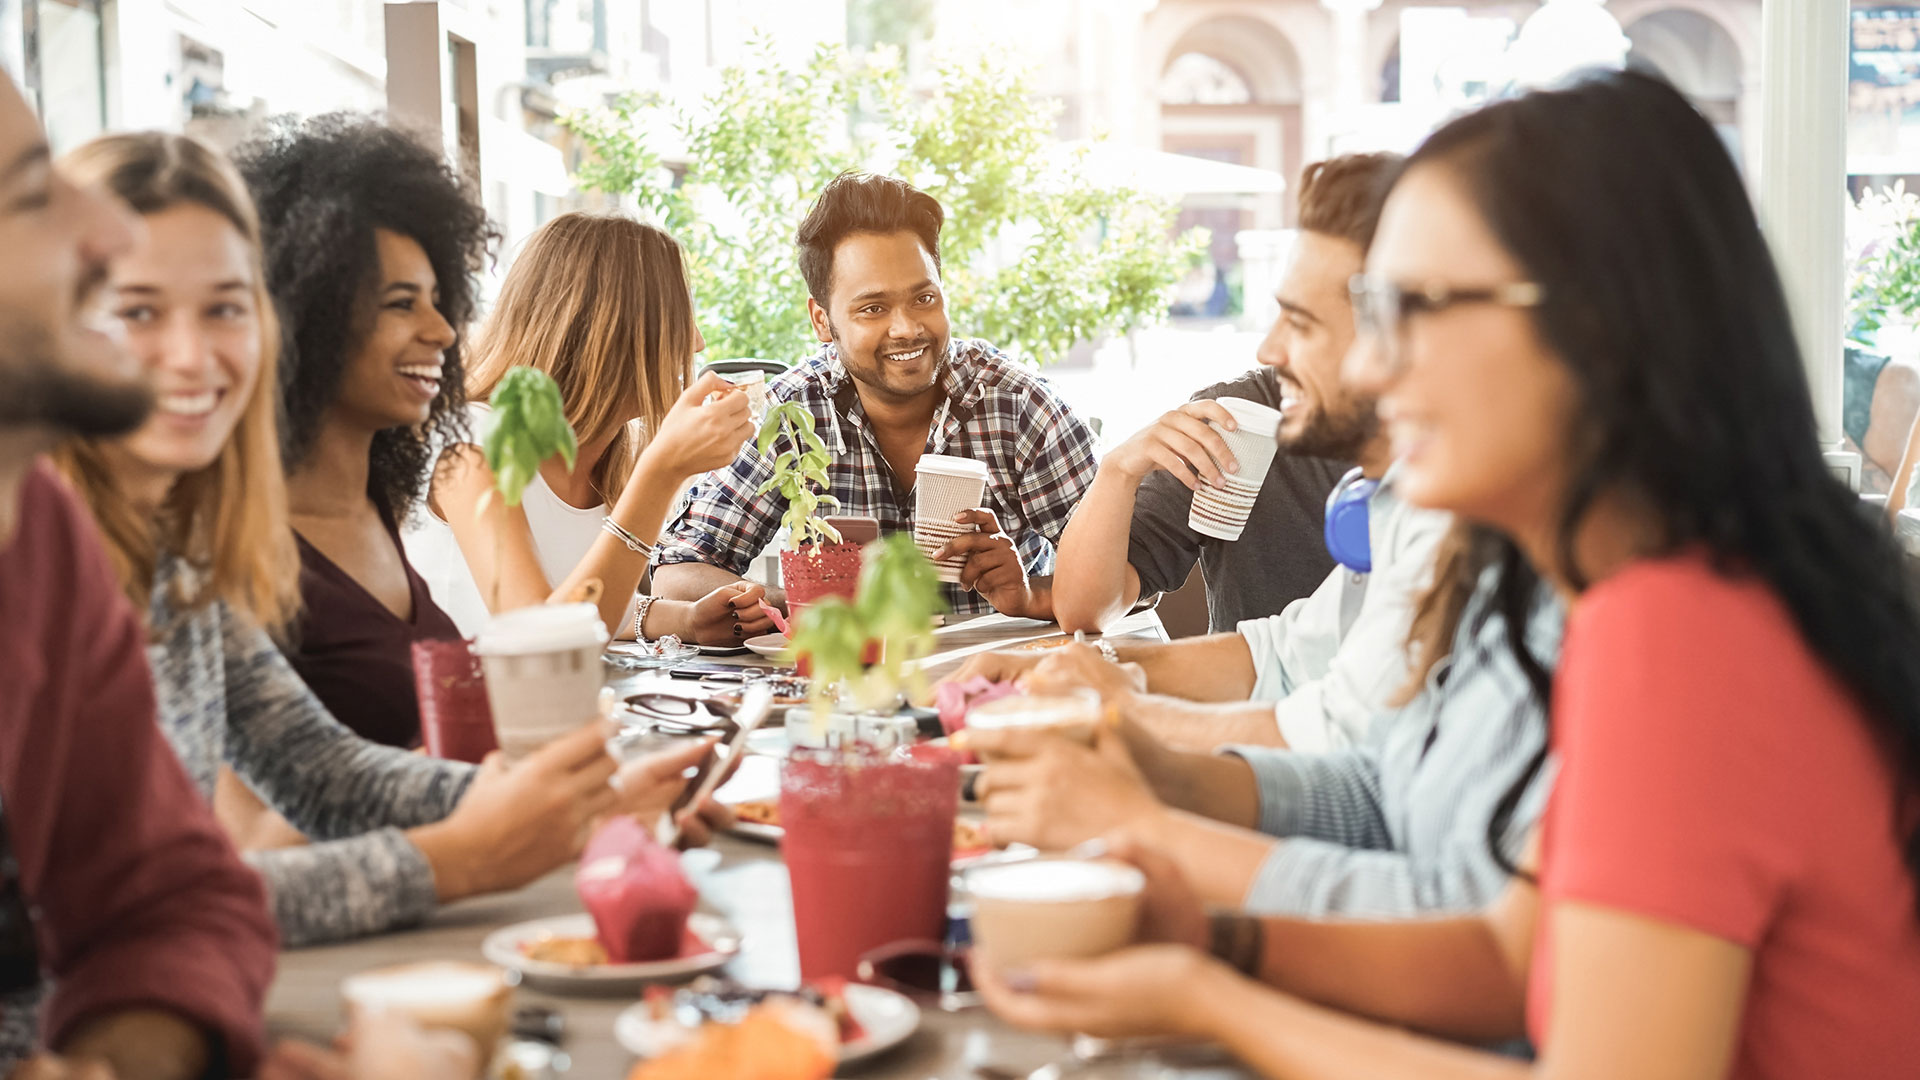 A group of friends sit around a table outside enjoying a brunch.